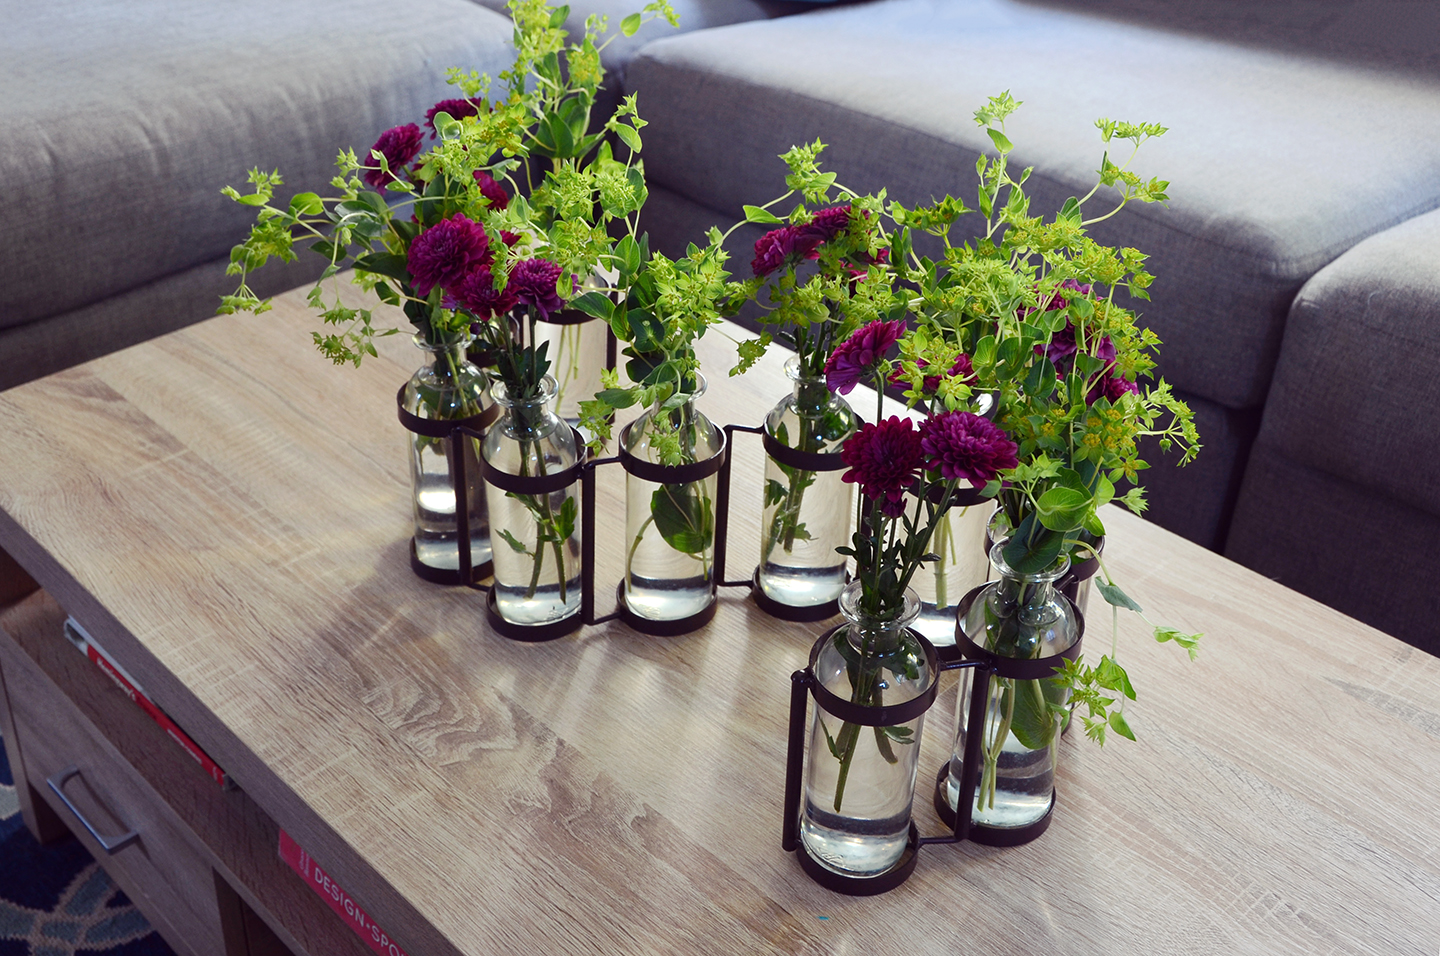 How To Make a Beautiful Centerpiece With Grocery Store Flowers /// By Design Fixation #entertaining #floral #affordable